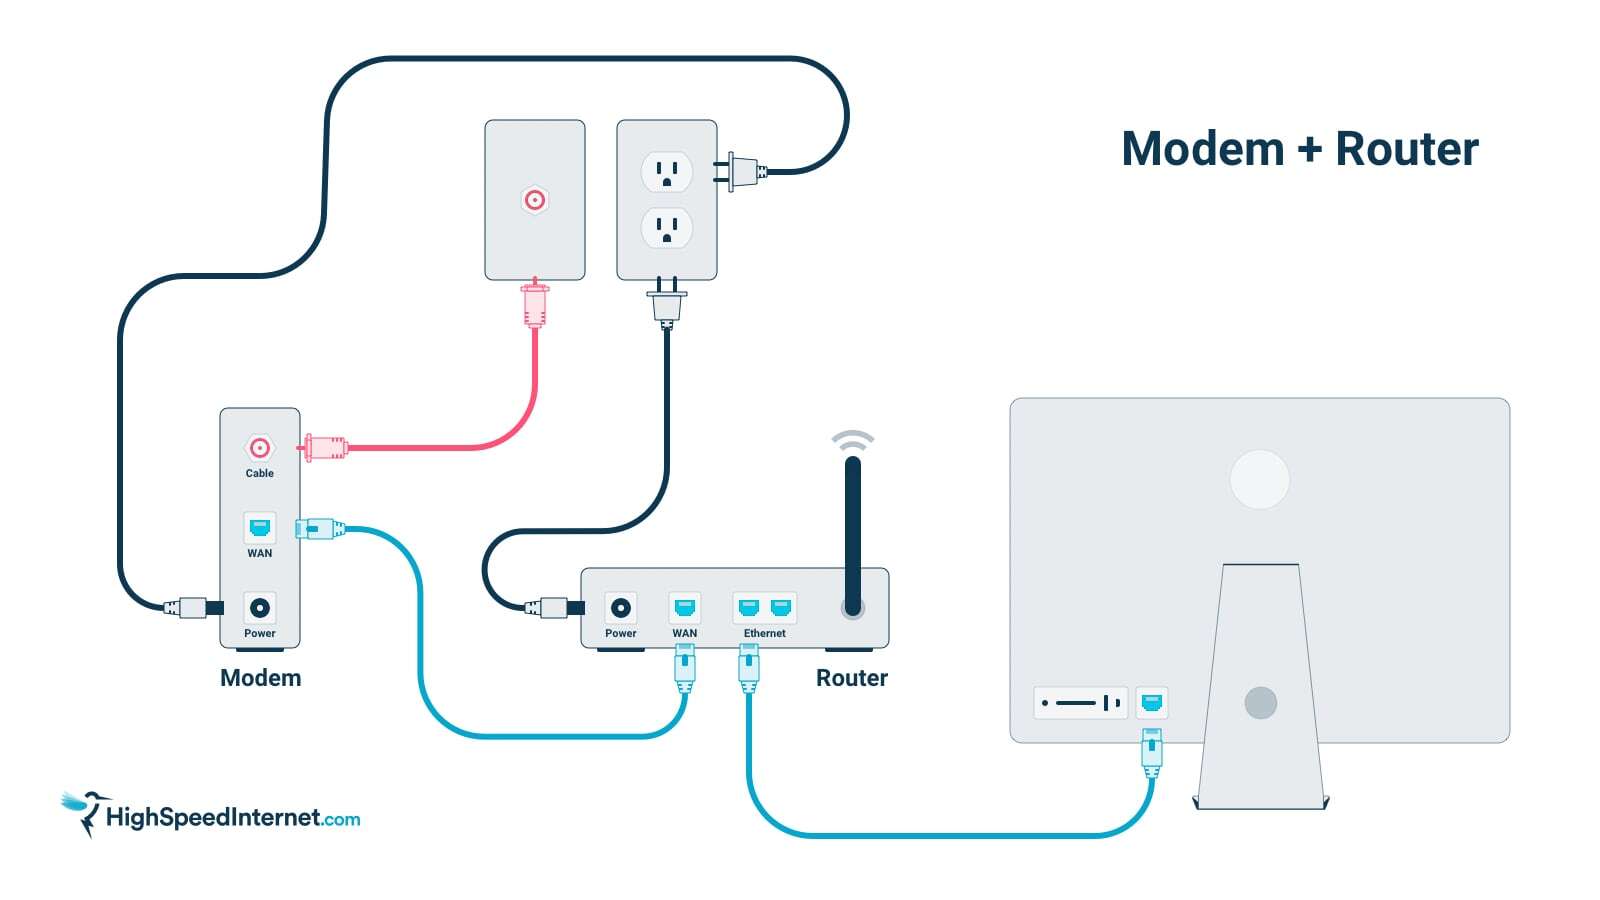 Ensure your console is connected to the internet
If using a wireless connection, try a wired connection instead